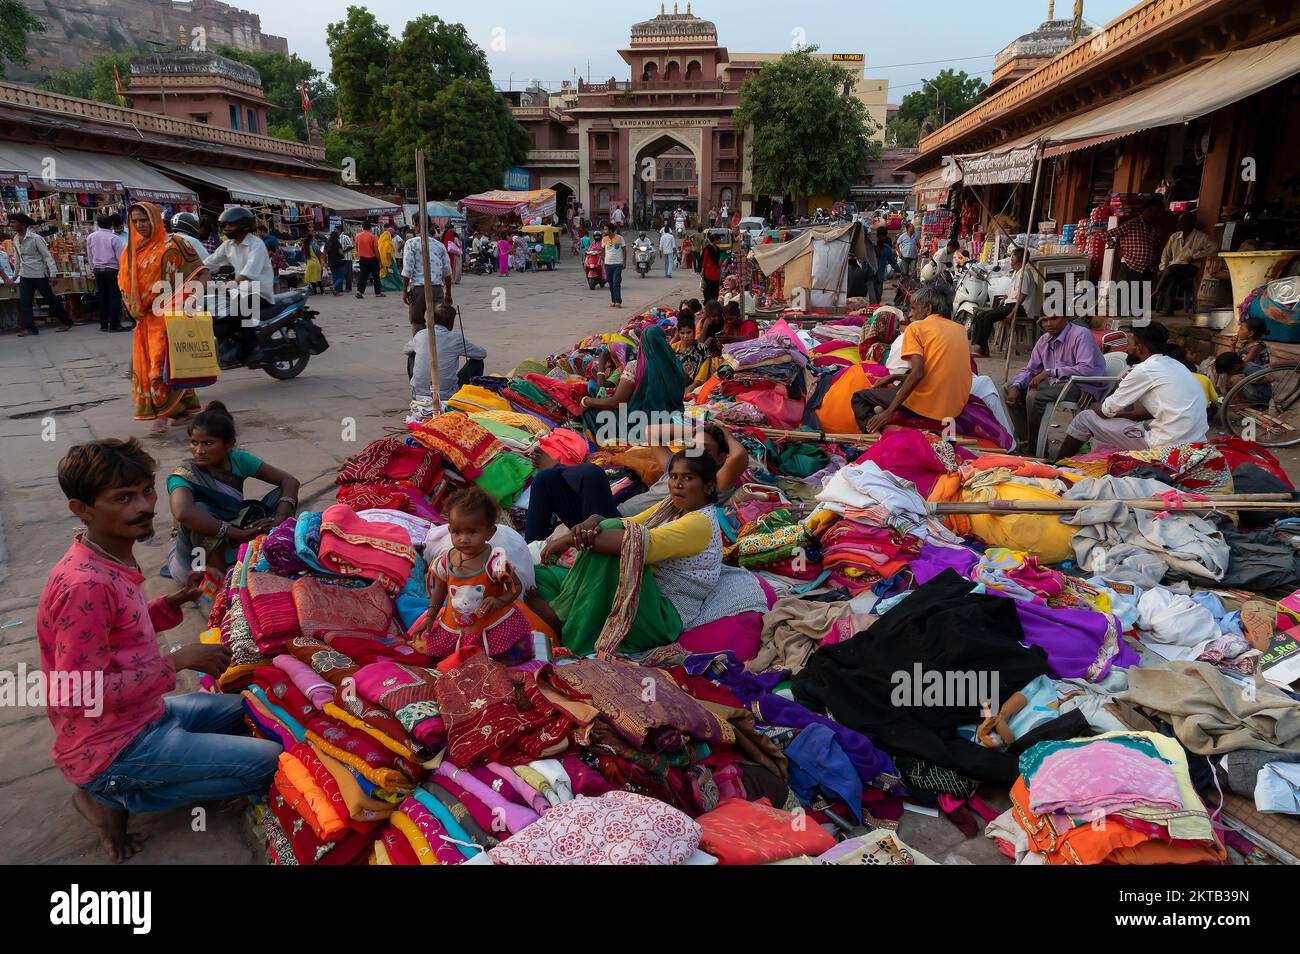 Jodhpur, Rajasthan, India - 20.10.2019 : Rajasthani womens clothes being sold at Famous Sardar Market and Ghanta ghar Clock tower in the evening. Stock Photo